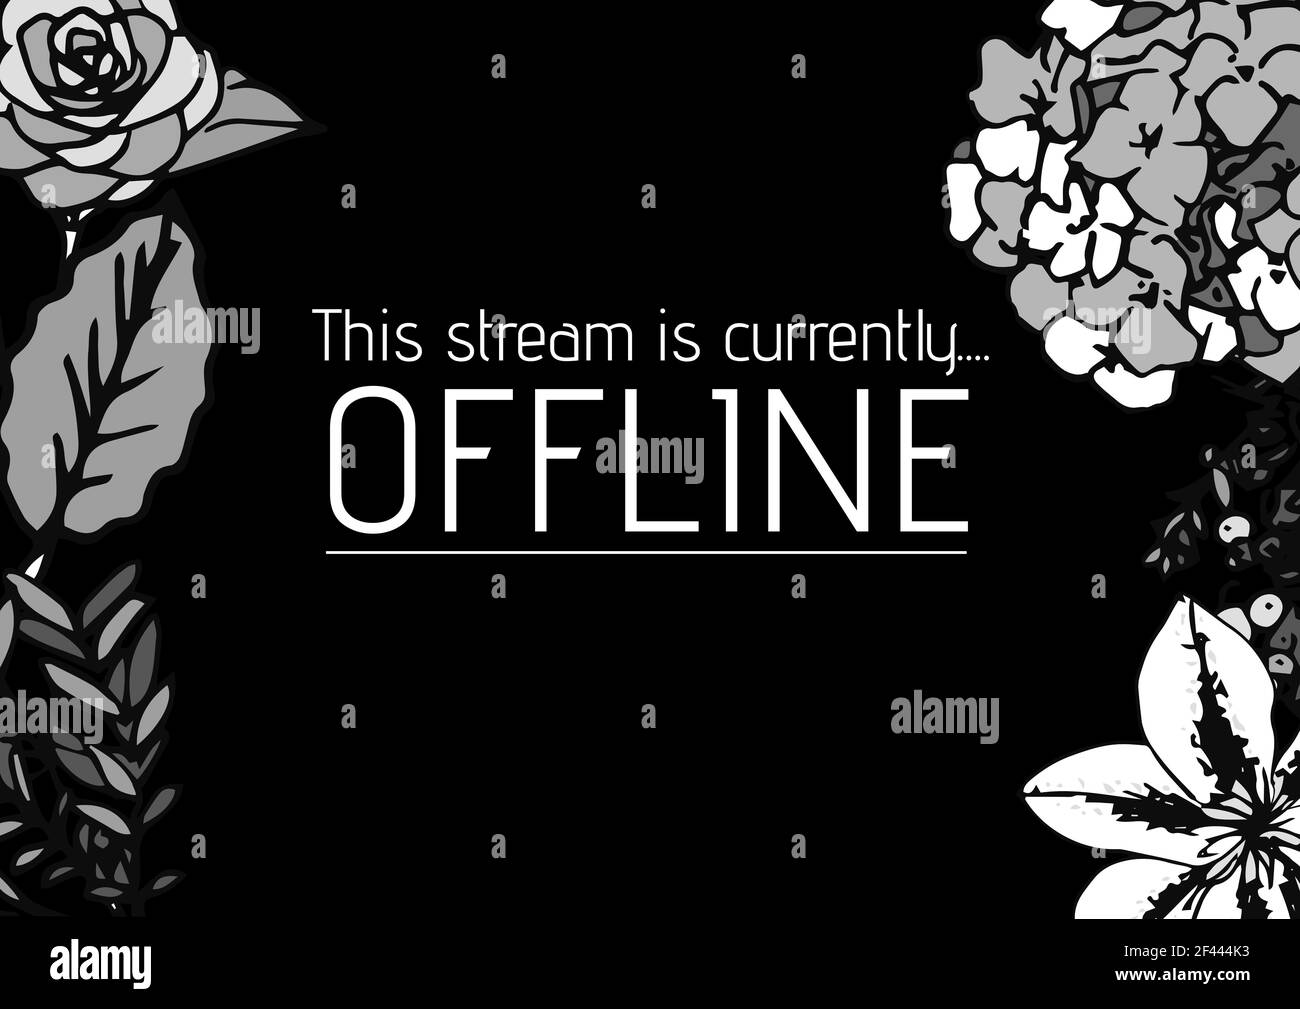 Digitally generated image of this stream is currently offline text and floral designs Stock Photo